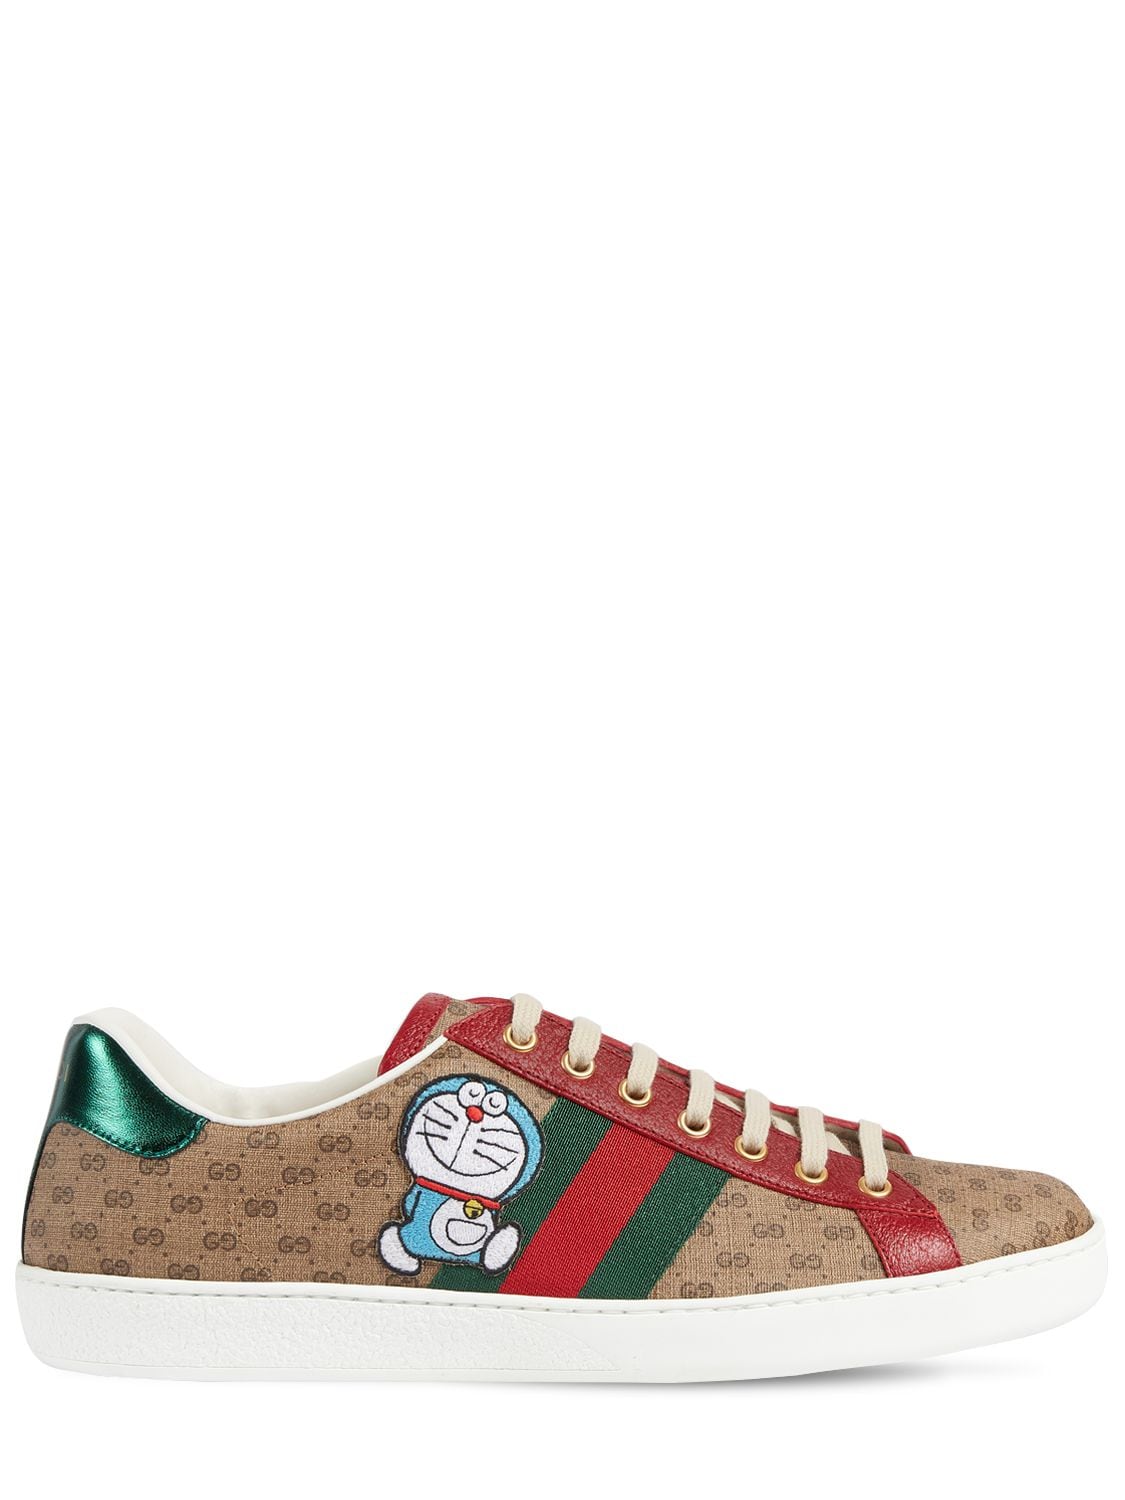 Doraemon New Ace Leather Sneakers